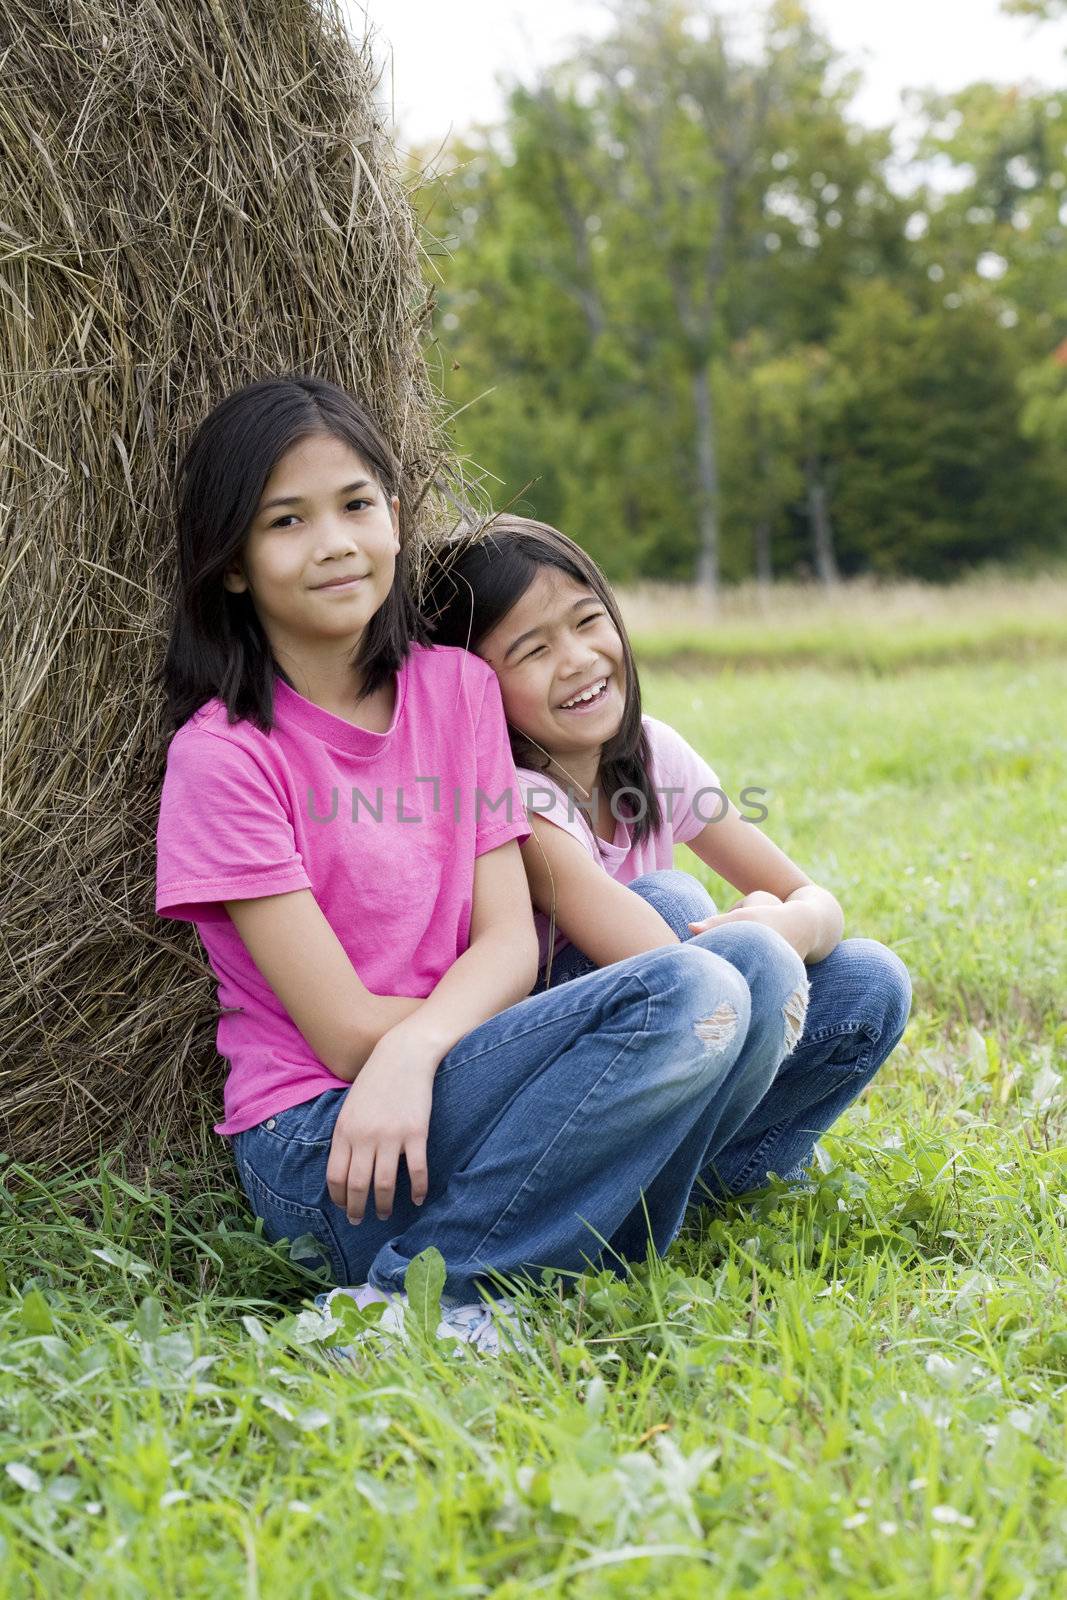 Two young girls sitting against haybale